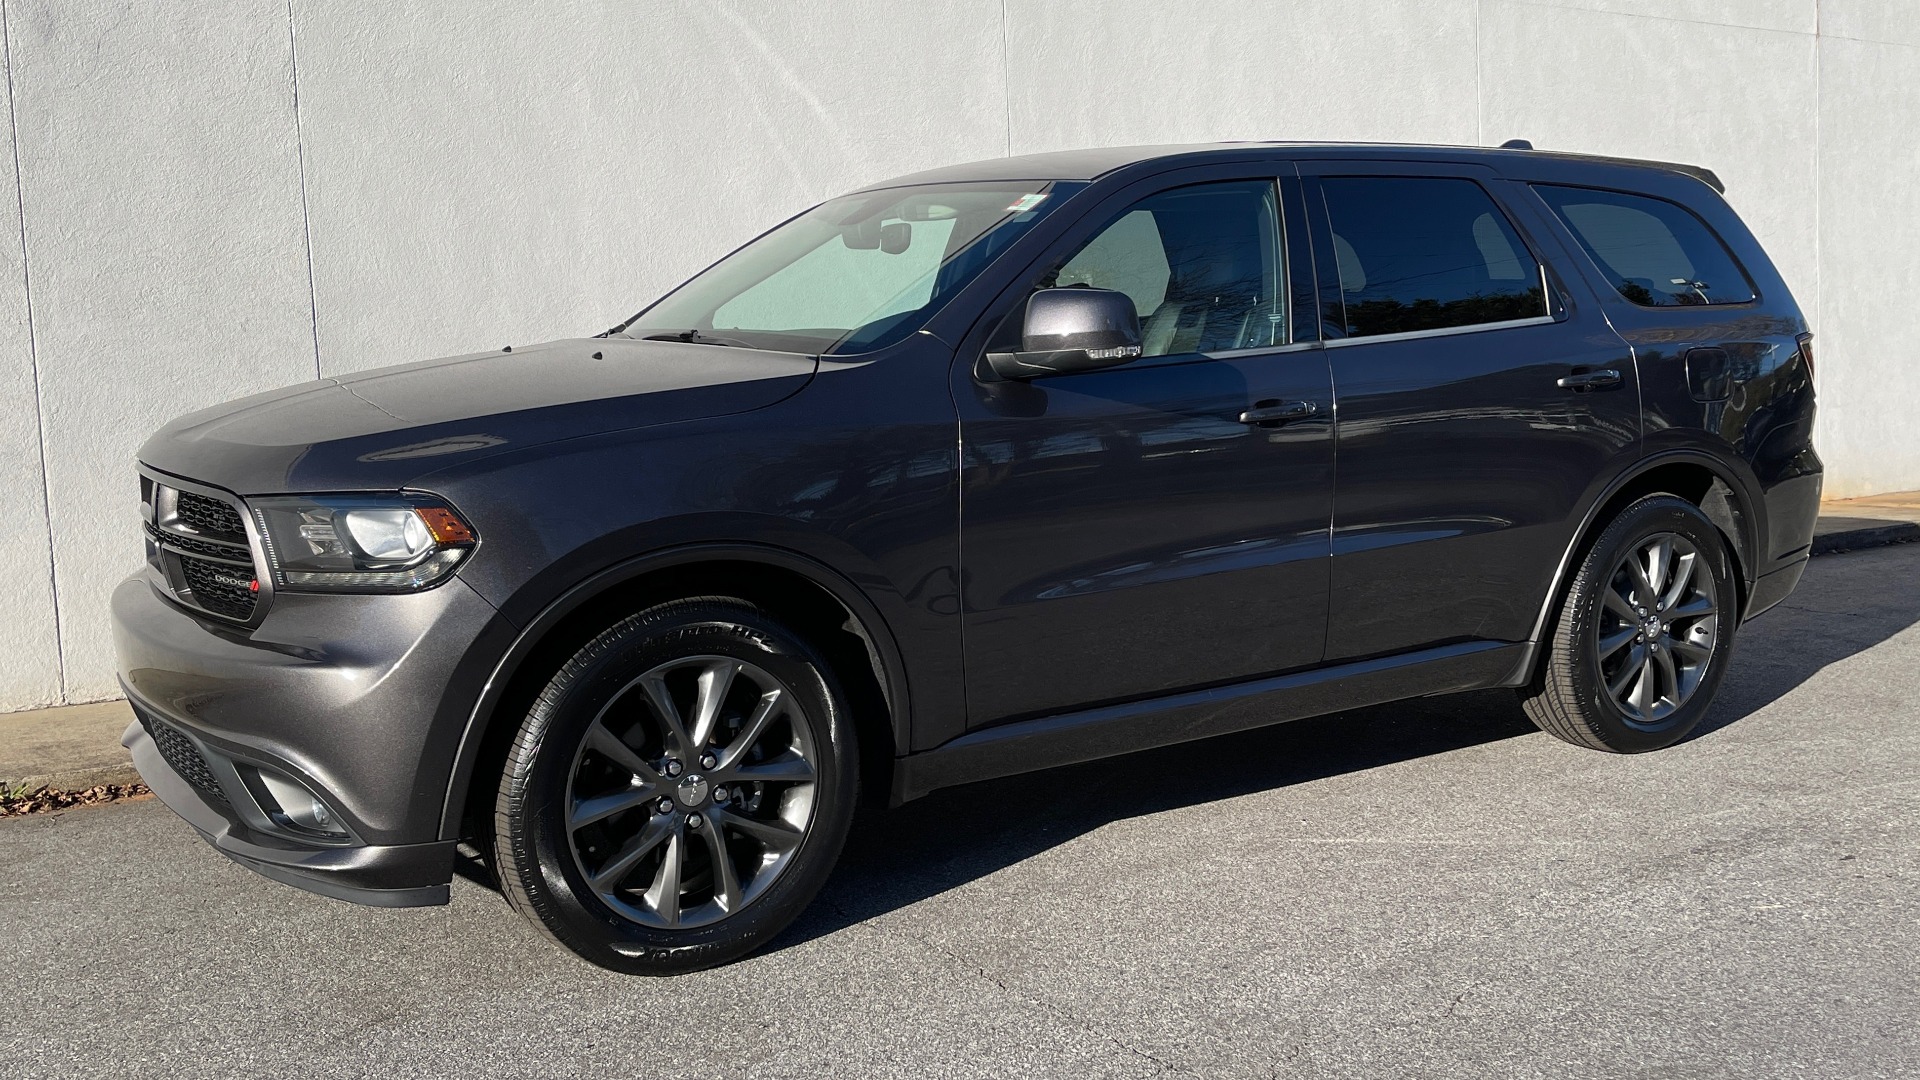 Used 2018 Dodge DURANGO GT RWD / 3.6L V6 / 8-SPD AUTO / APPLE CARPLAY / REARVIEW for sale $32,295 at Formula Imports in Charlotte NC 28227 4